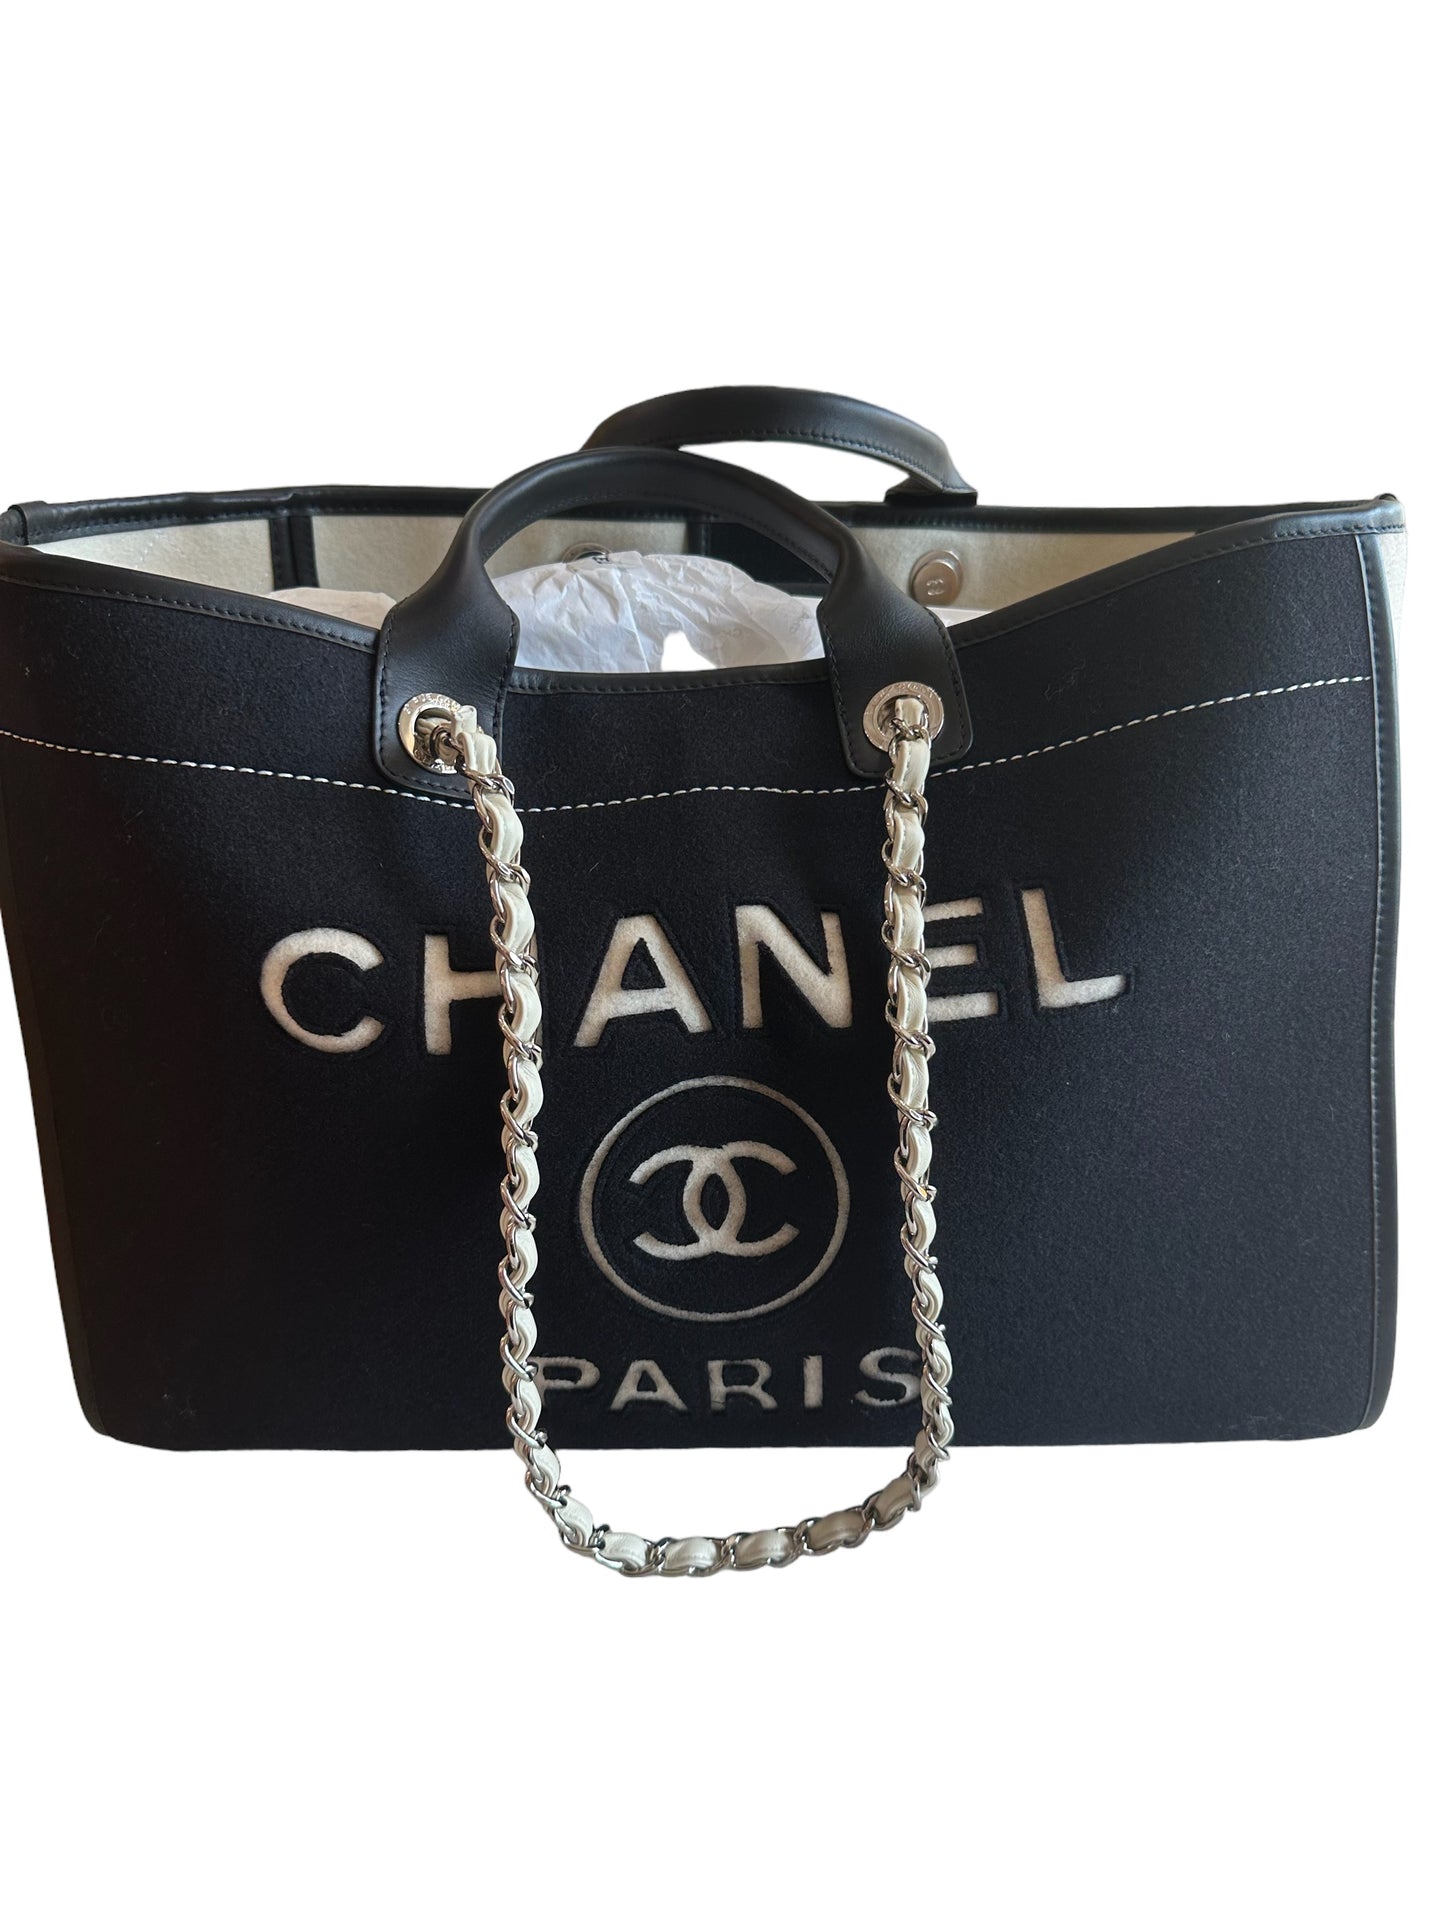 Chanel black and white felt/wool Deauville large